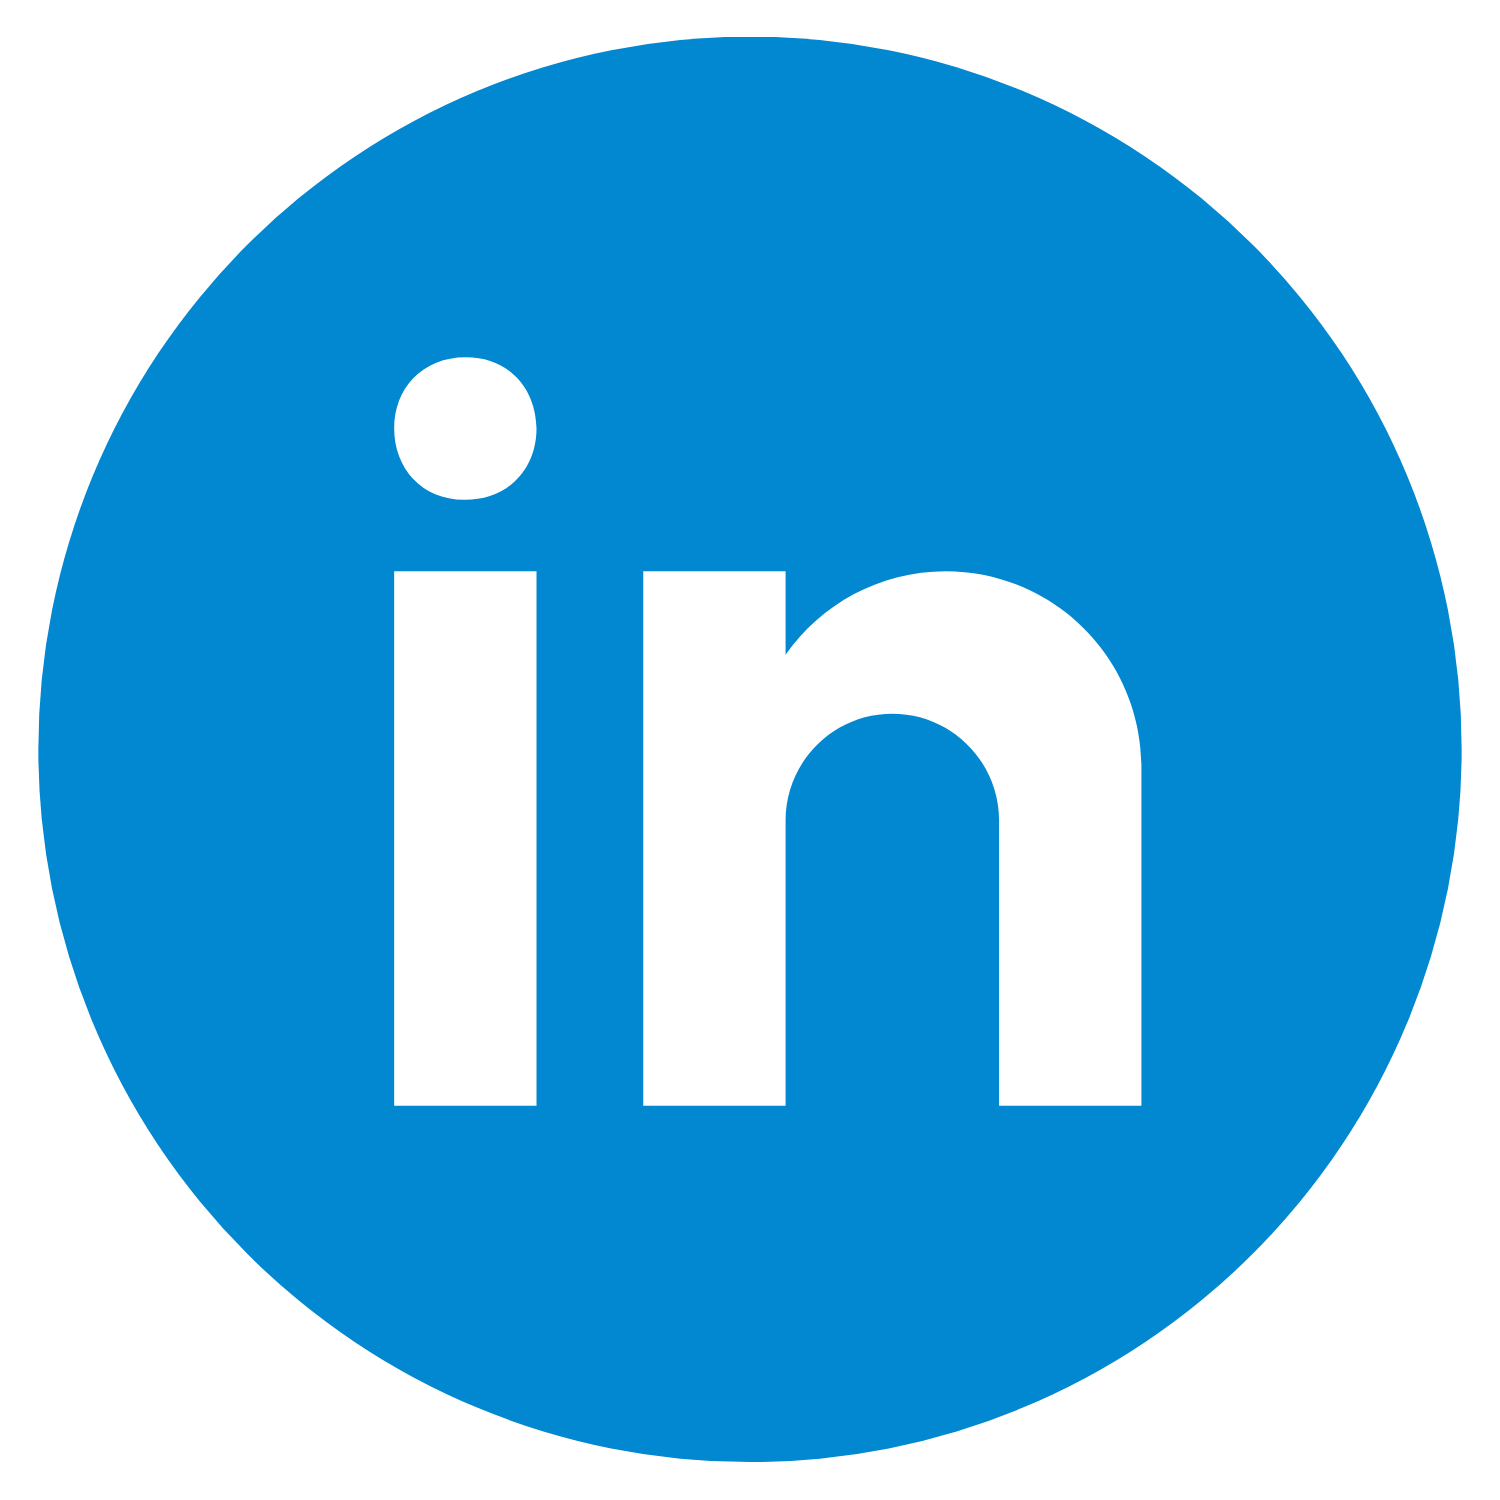 LinkedIn Icon.png